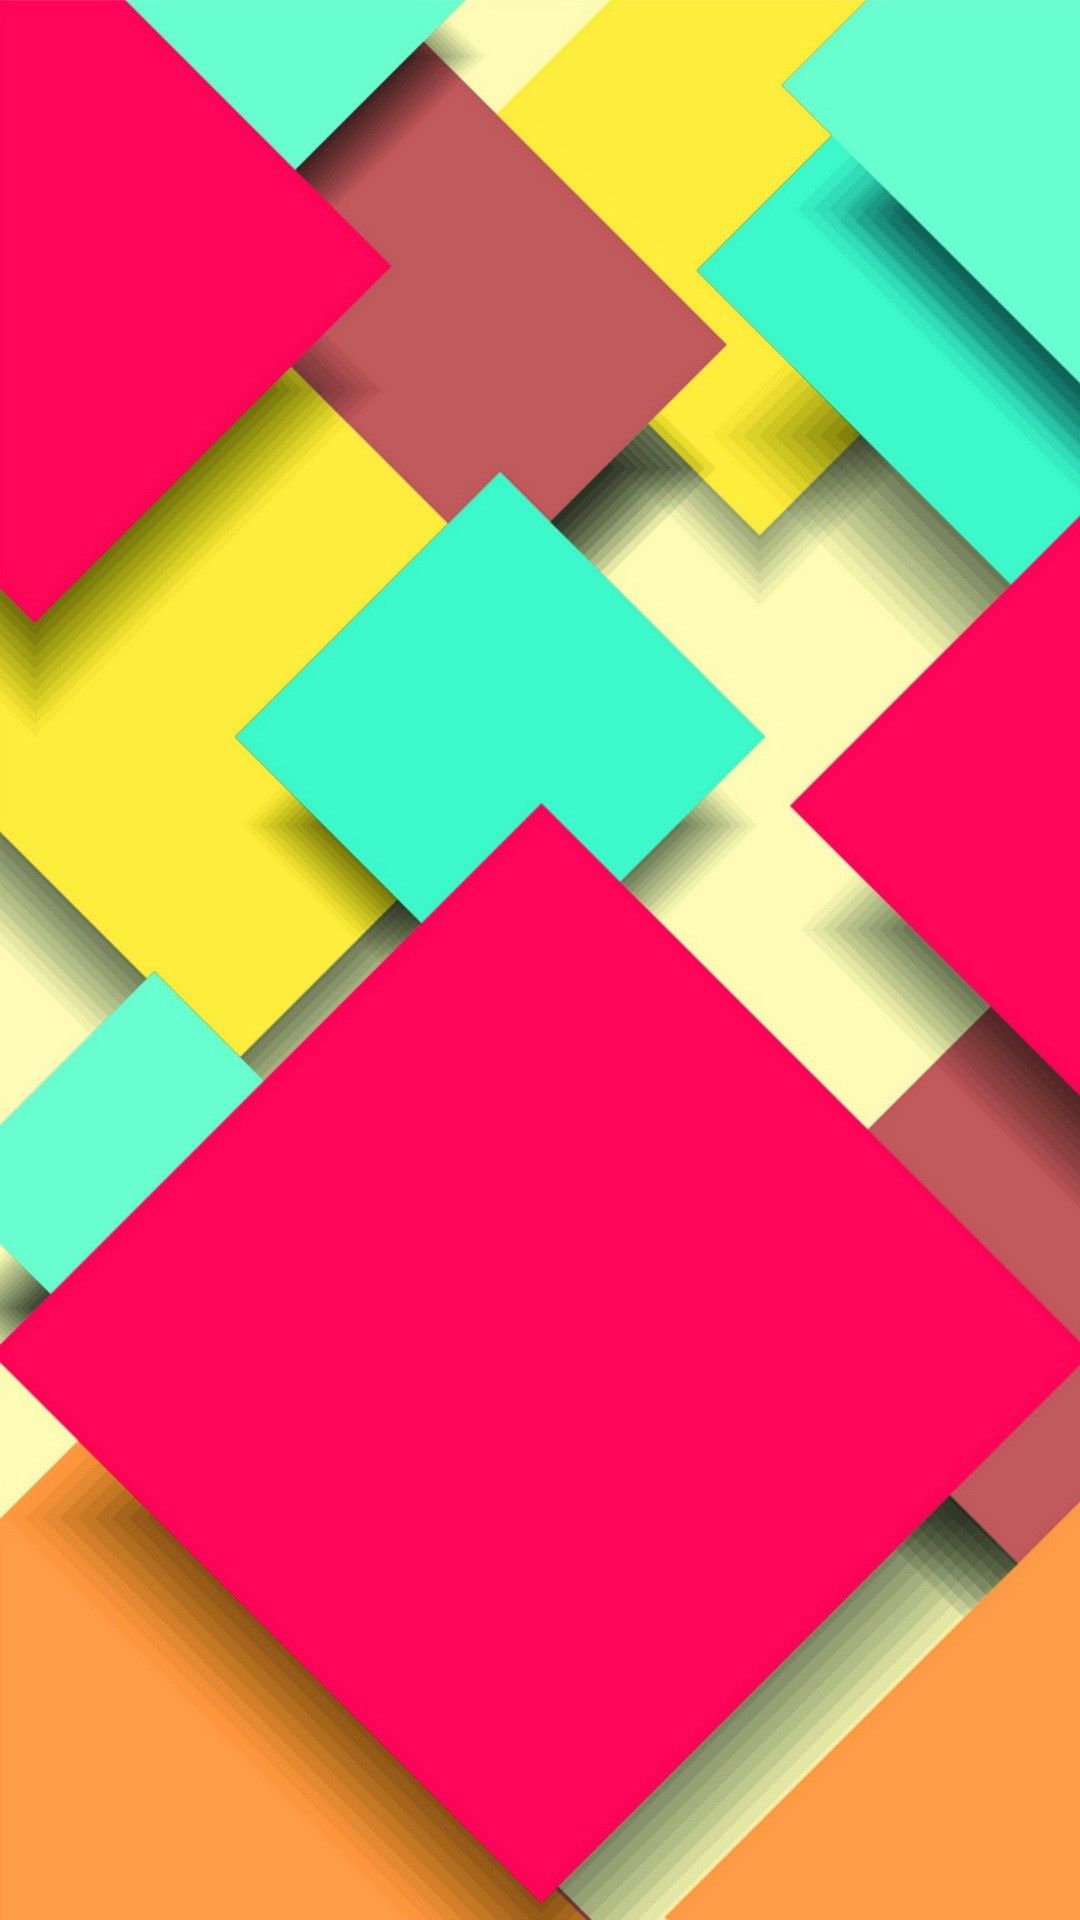 Abstract Colorful Square Overlap IPhone 6 Wallpaper Download. IPhone Wallpaper, IPad Wallpaper One Stop. IPhone 6 Wallpaper, Mobile Wallpaper, IPhone Wallpaper